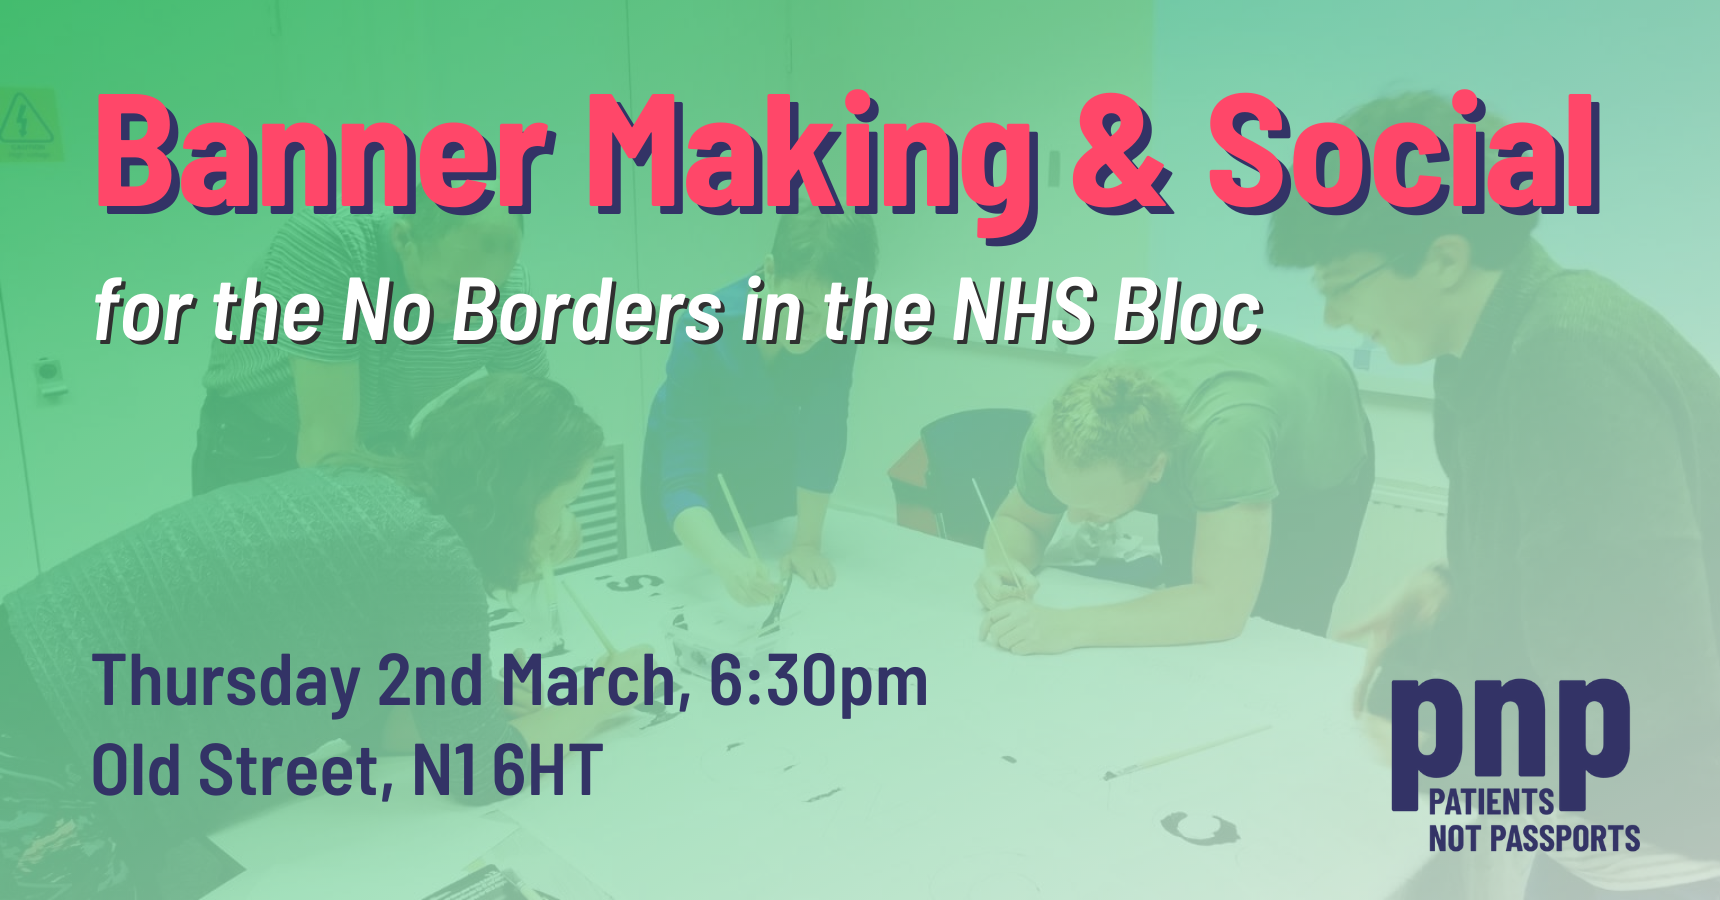 Banner Making & Social for the No Borders in the NHS Bloc – Thursday 2nd March, 6:30pm, Old Street, N1 6HT